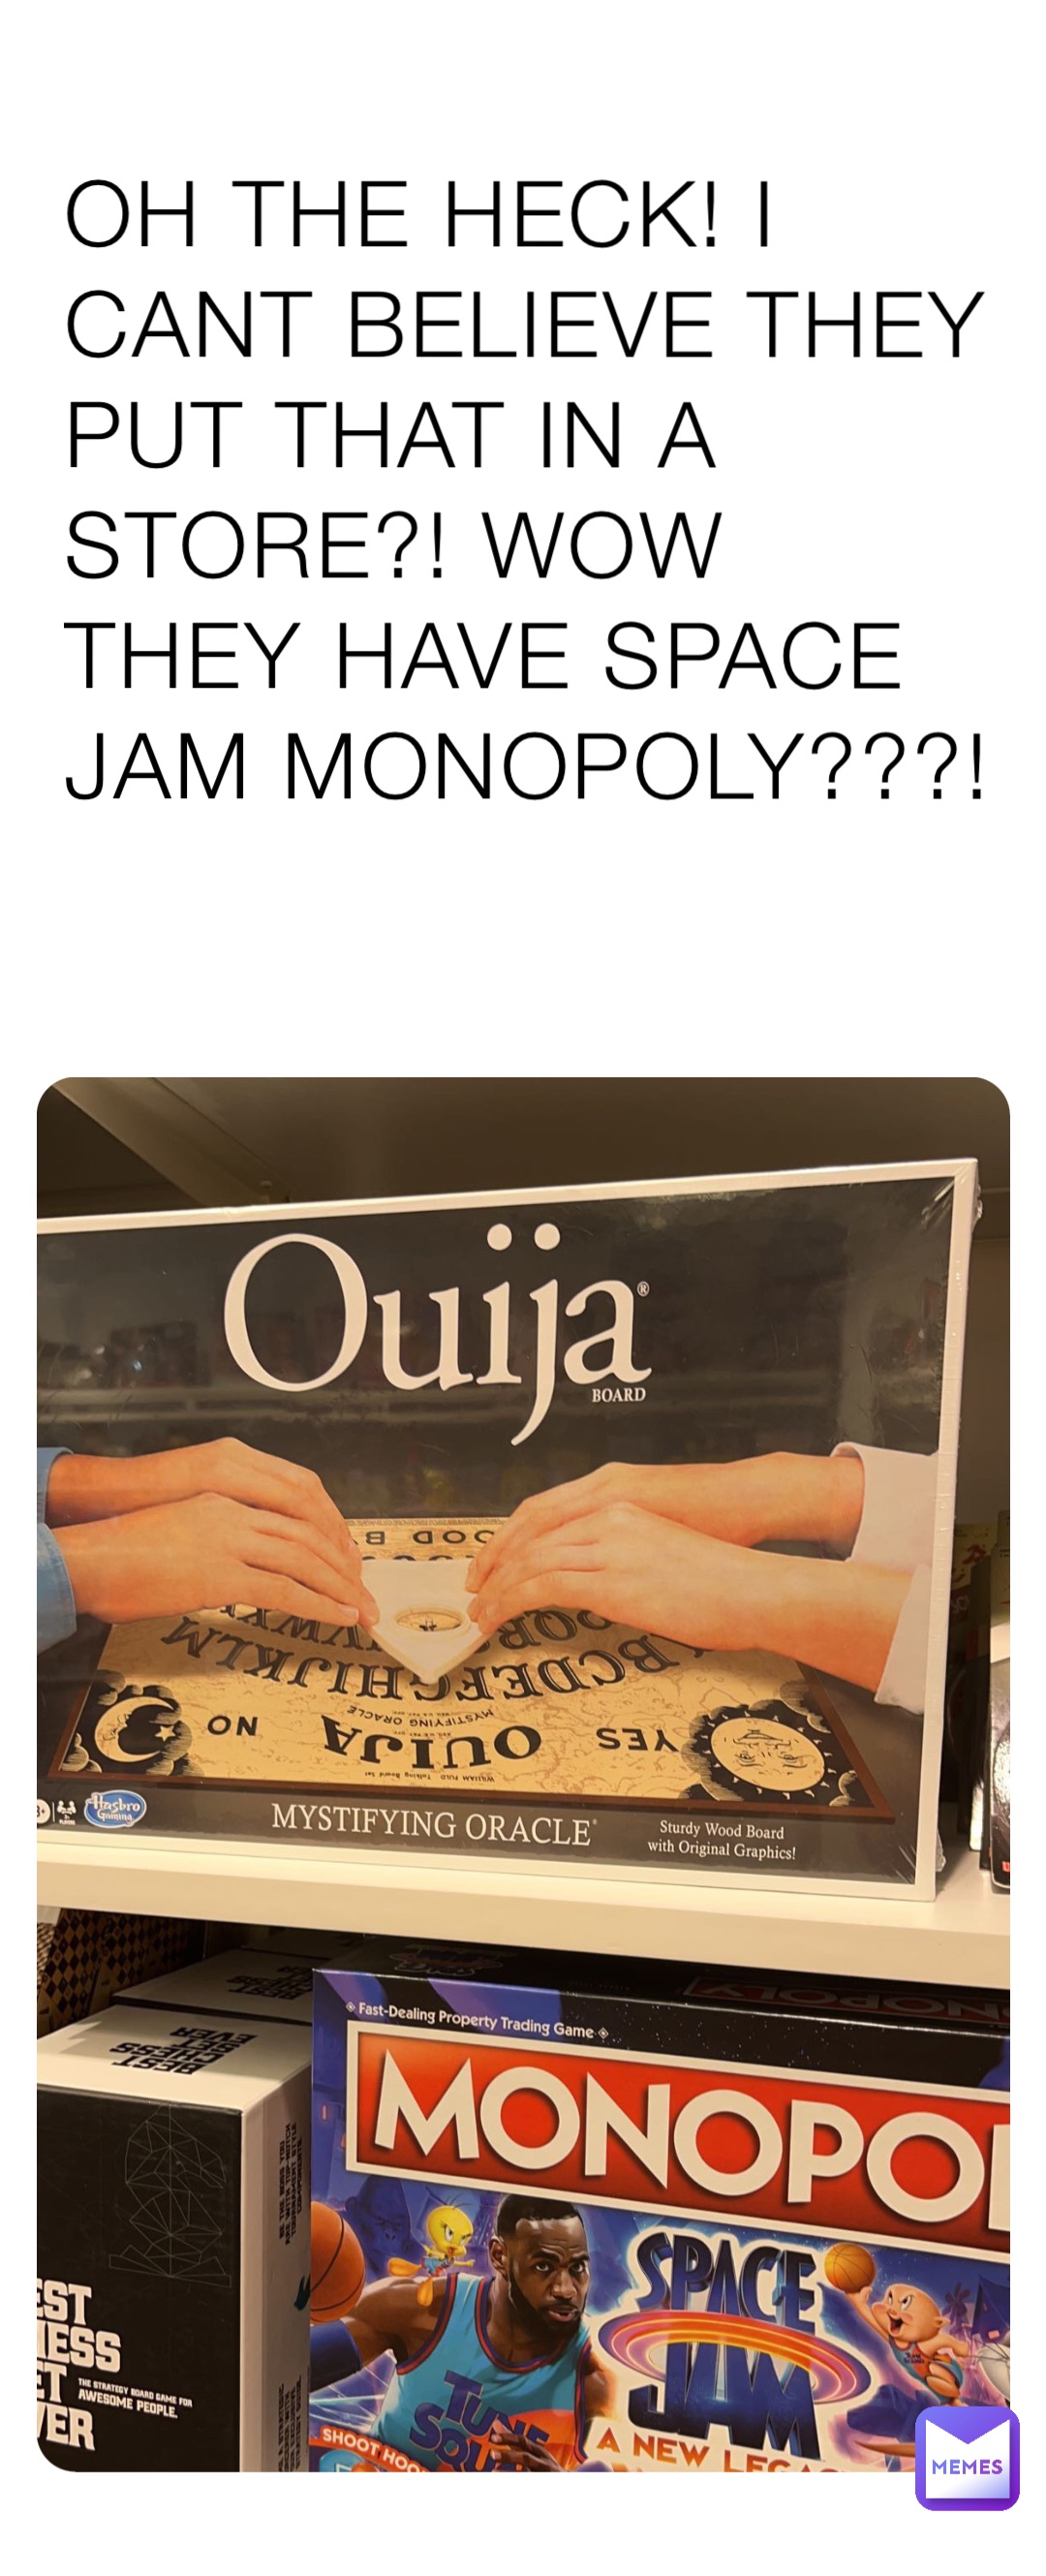 OH THE HECK! I CANT BELIEVE THEY PUT THAT IN A STORE?! WOW THEY HAVE SPACE JAM MONOPOLY???!